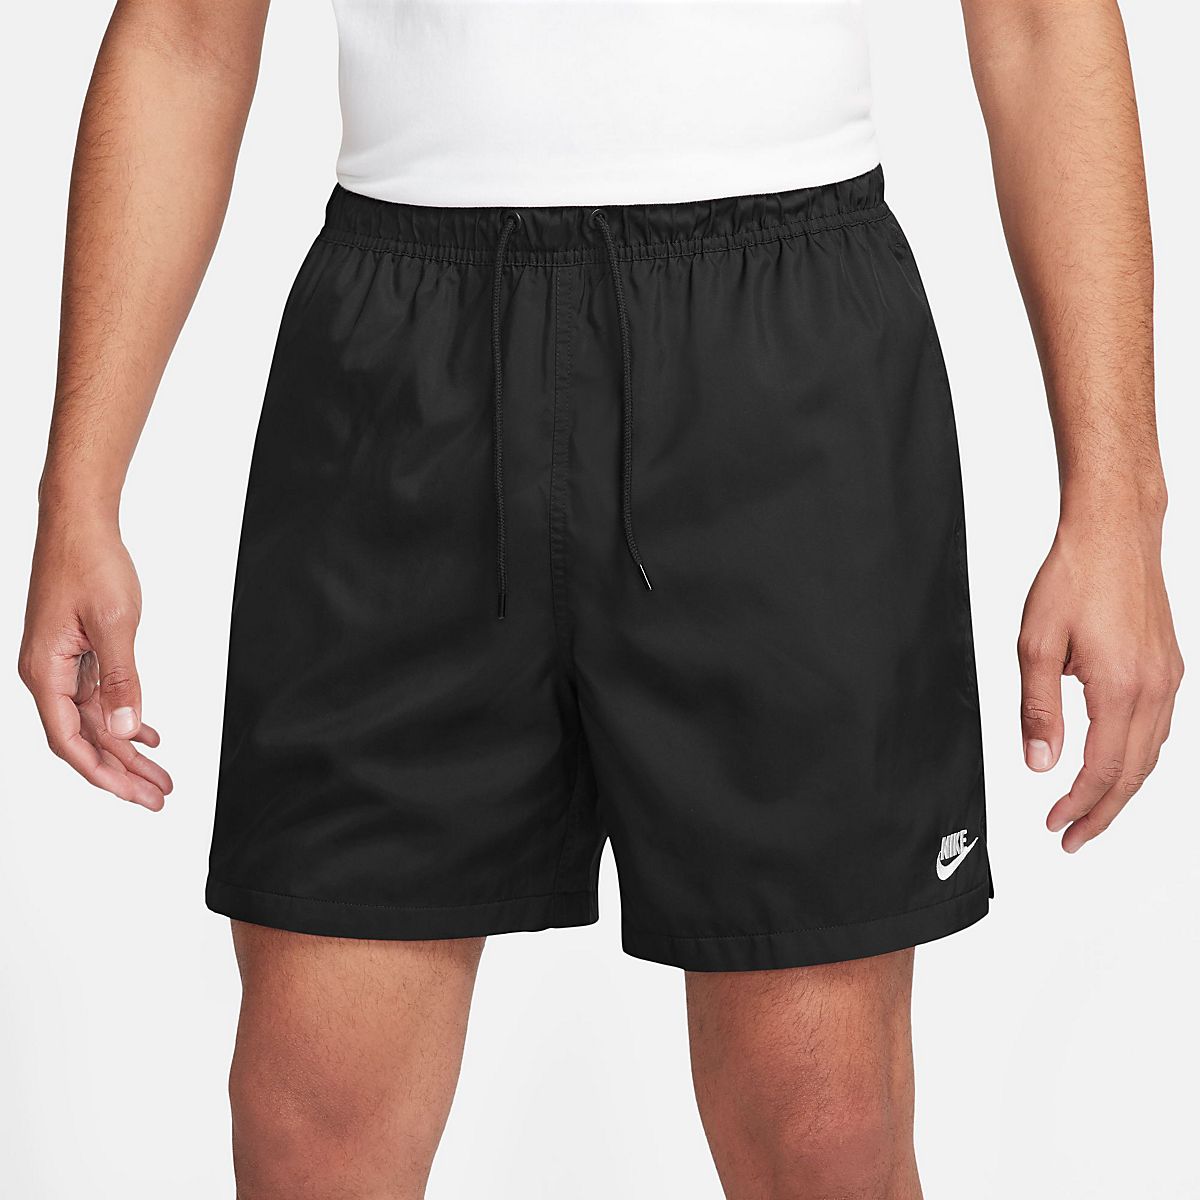 Nike Men's NSW Club Flow Shorts | Free Shipping at Academy